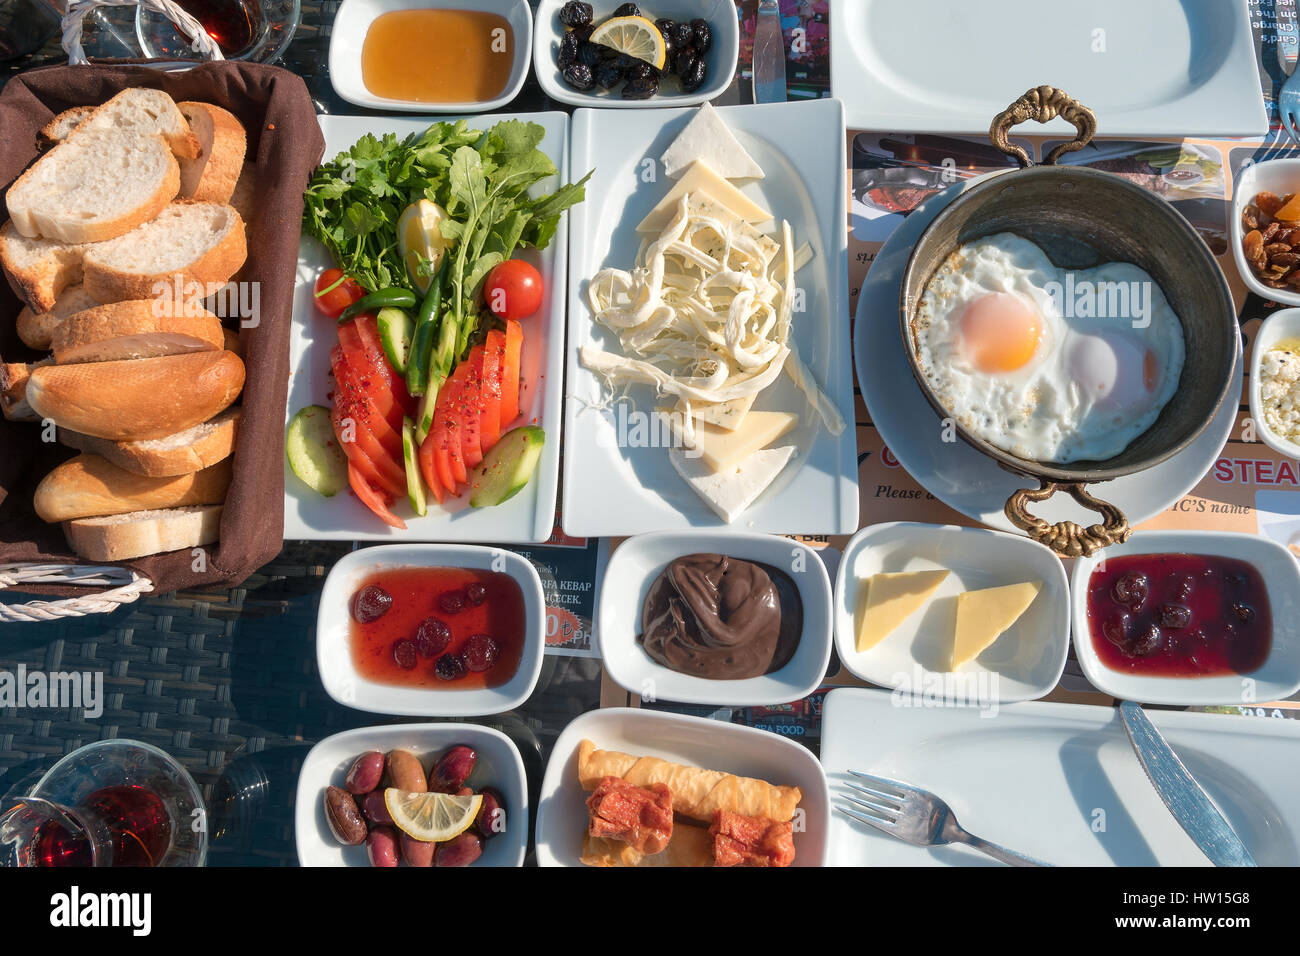 Turkish breakfast on a table with breads and eggs Stock Photo